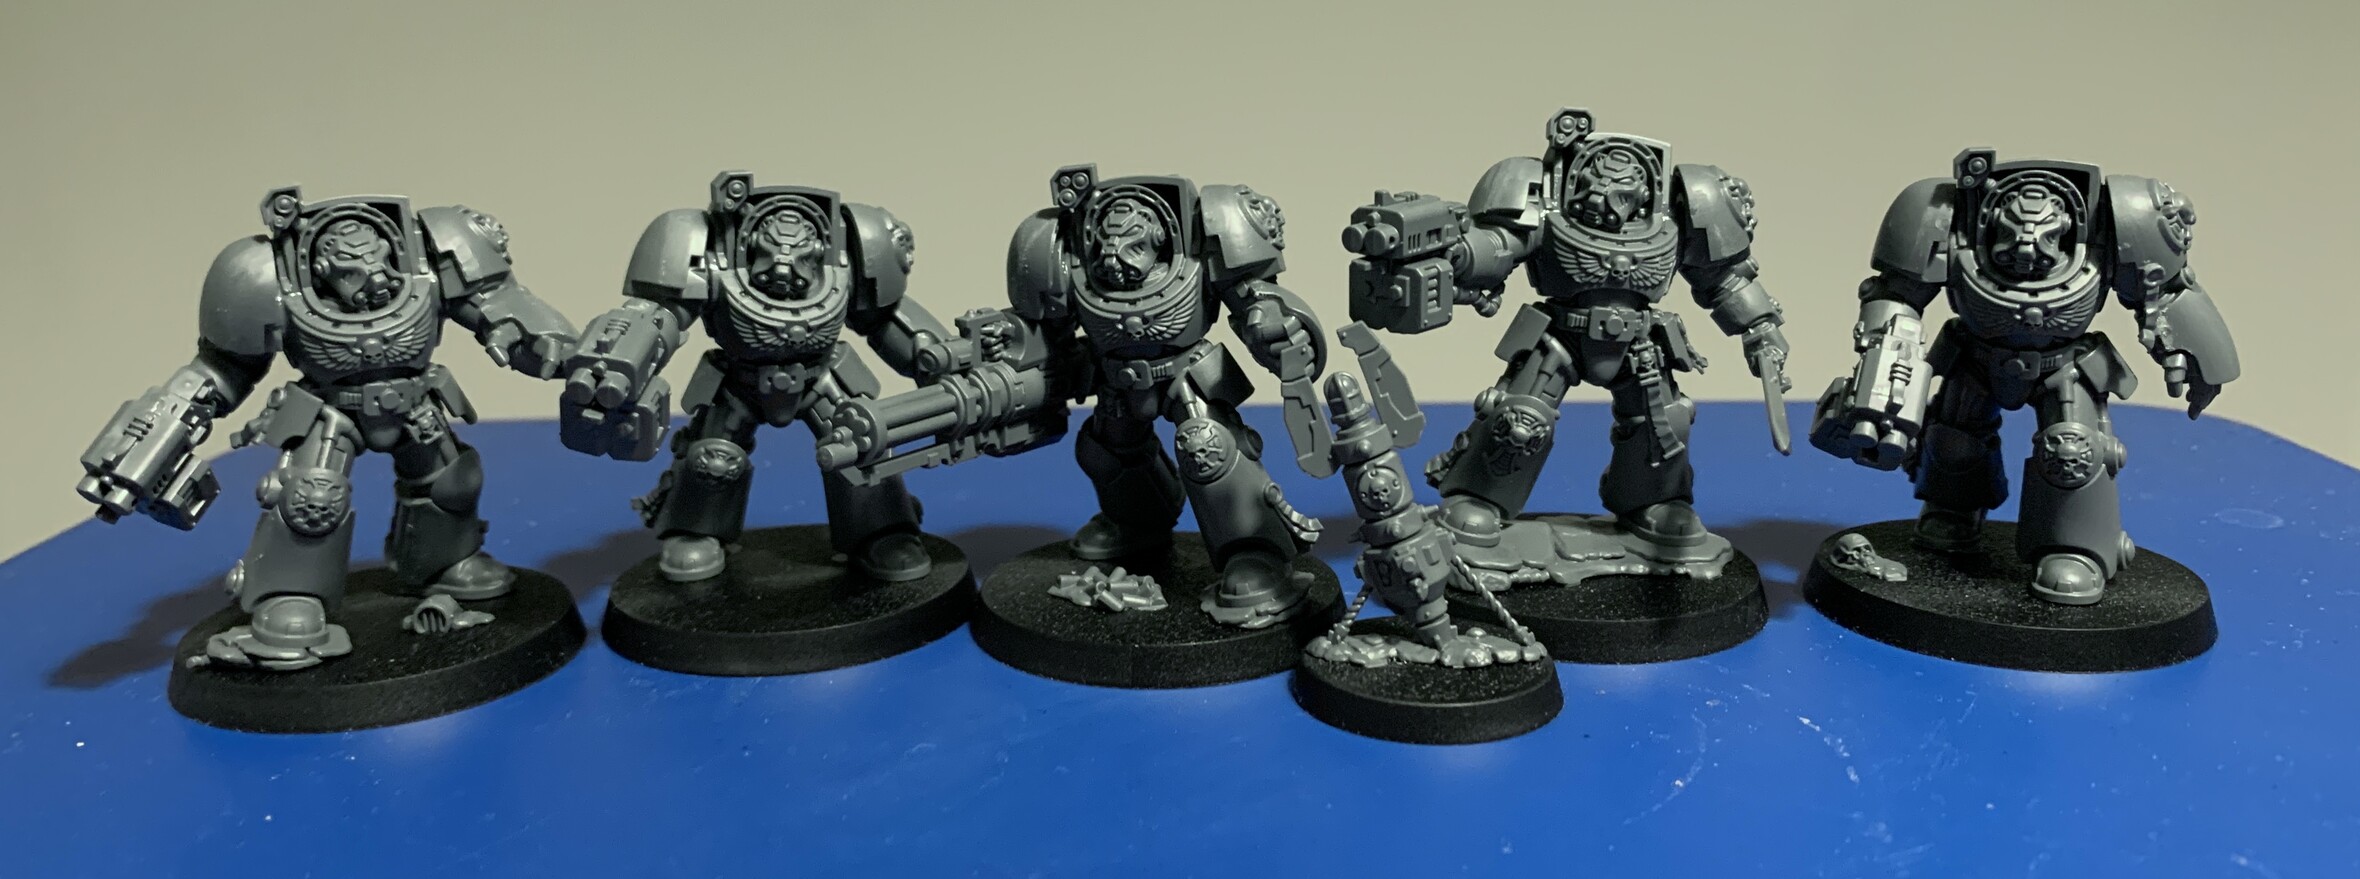 5 of the new larger Warhammer 40k terminator space marine models with a homing beacon in front. They have assortment of weapons with most carrying dual barrelled weapons. One has a large barrelled mini-gun style weapon and one is carry a sword. The homing beacon looks like a missile thatâ€™s landed and lodged in the ground.